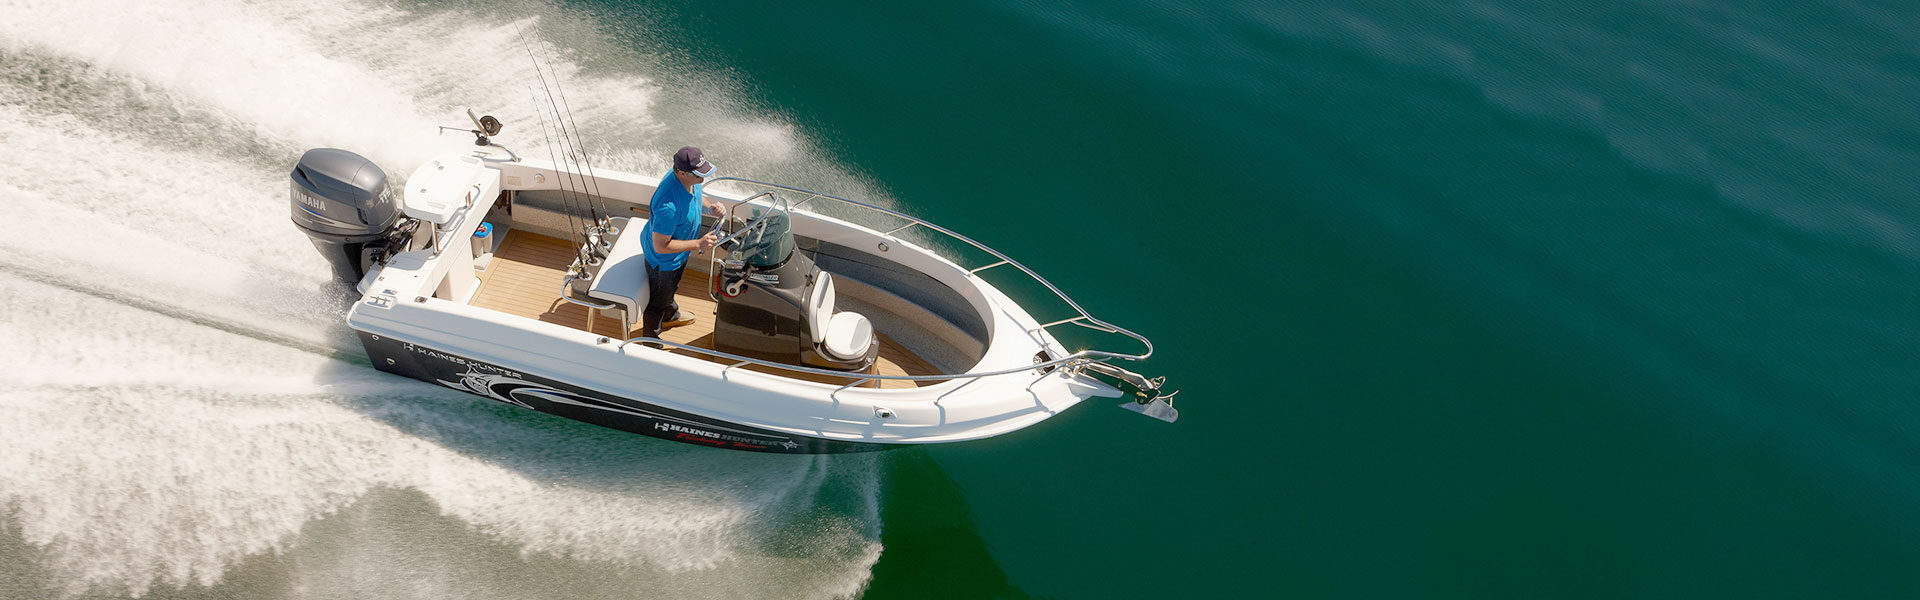 A Passionate Fisherman Called ‘Jack’ Loves His Brand New 675 Haines Hunter Offshore